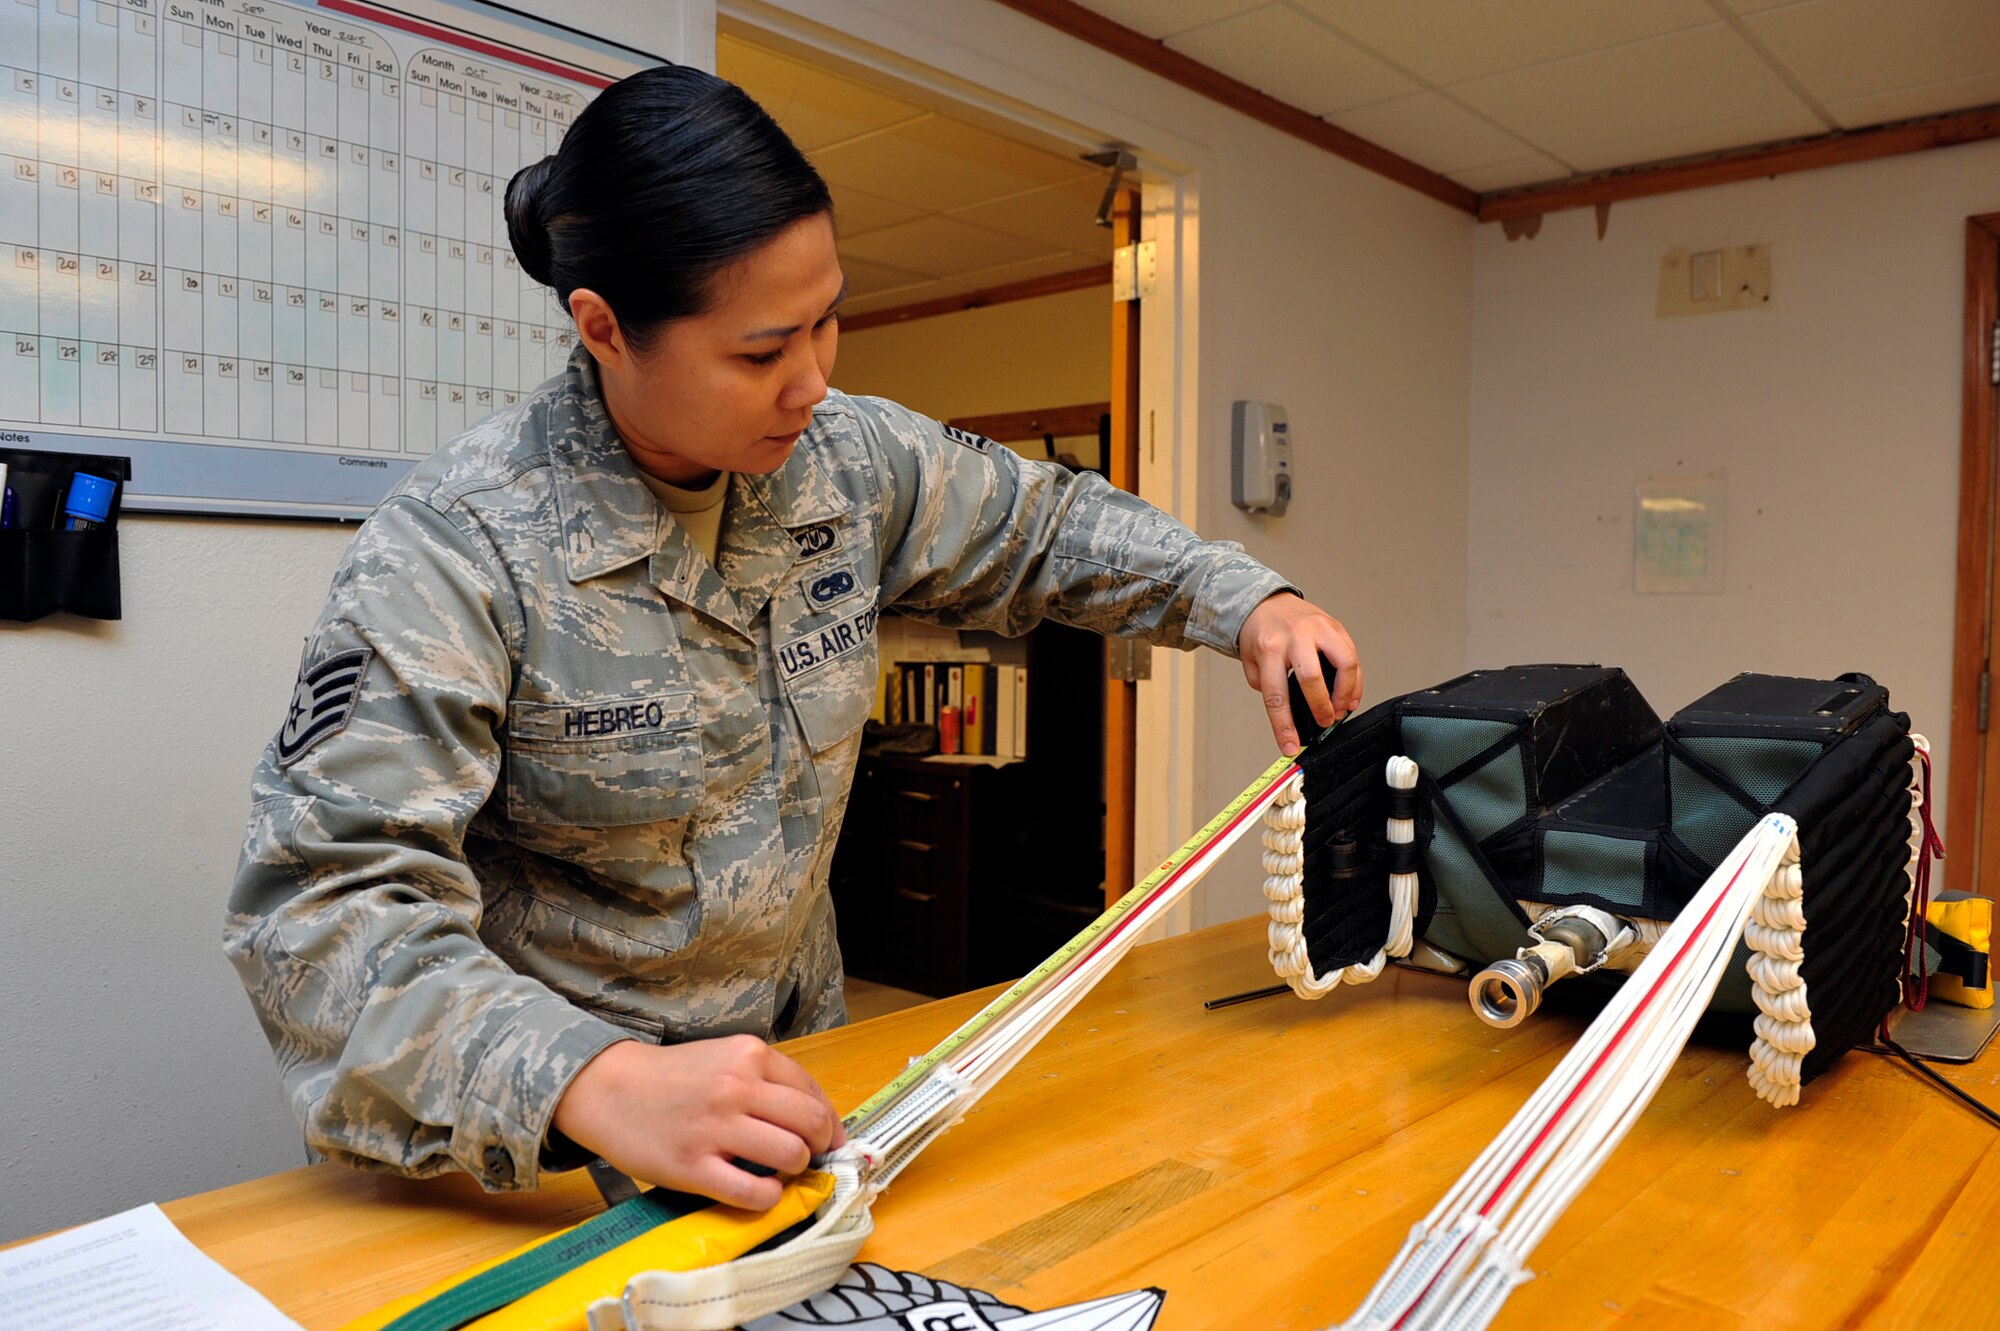 Staff Sgt. Marianne Hebreo, 56th Operations Support Squadron Aircrew Flight Equipment technician, verifies the stowing of the parachute’s suspension lines Sept. 14, 2015 in the AFE building at Luke Air Force Base, Arizona. Conducting an inspection on a parachute is a two-person job and requires great attention to detail, because missing one step could lead to a malfunction when deployed. (U.S. Air Force photo by Senior Airman Grace Lee)